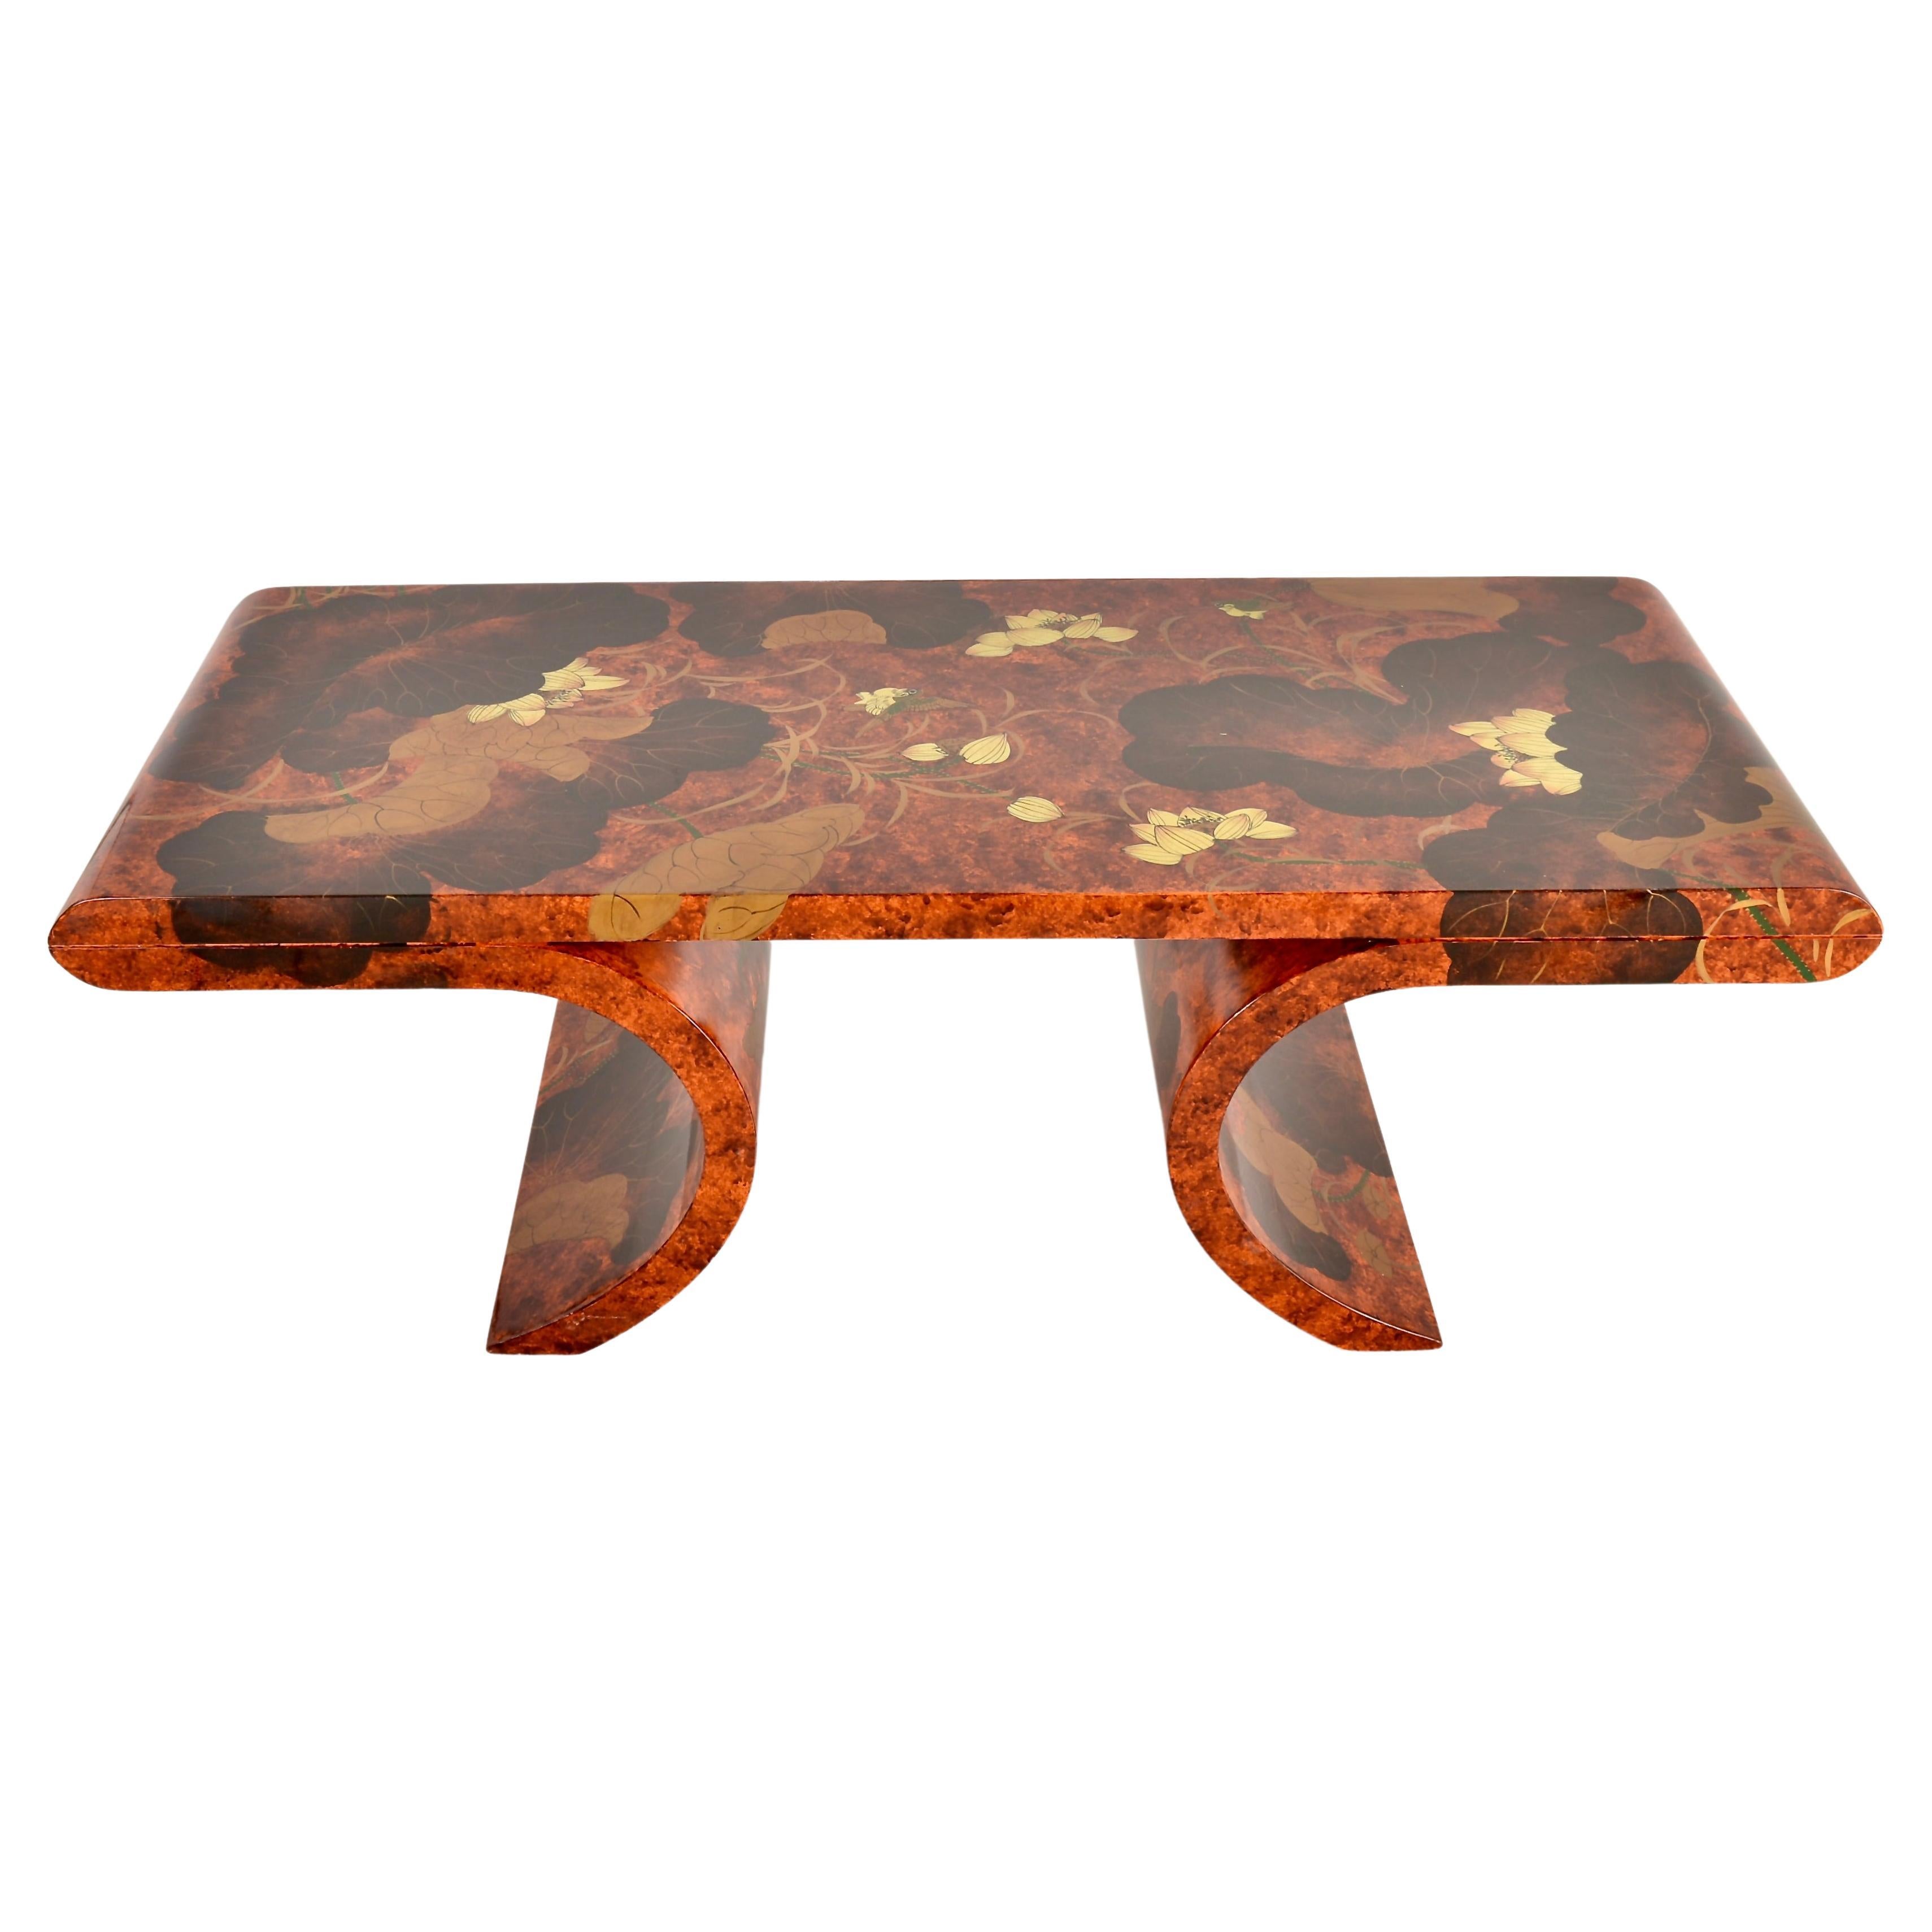 Hand Decorated Lacquer on Wood Cocktail Table, c 1980s For Sale